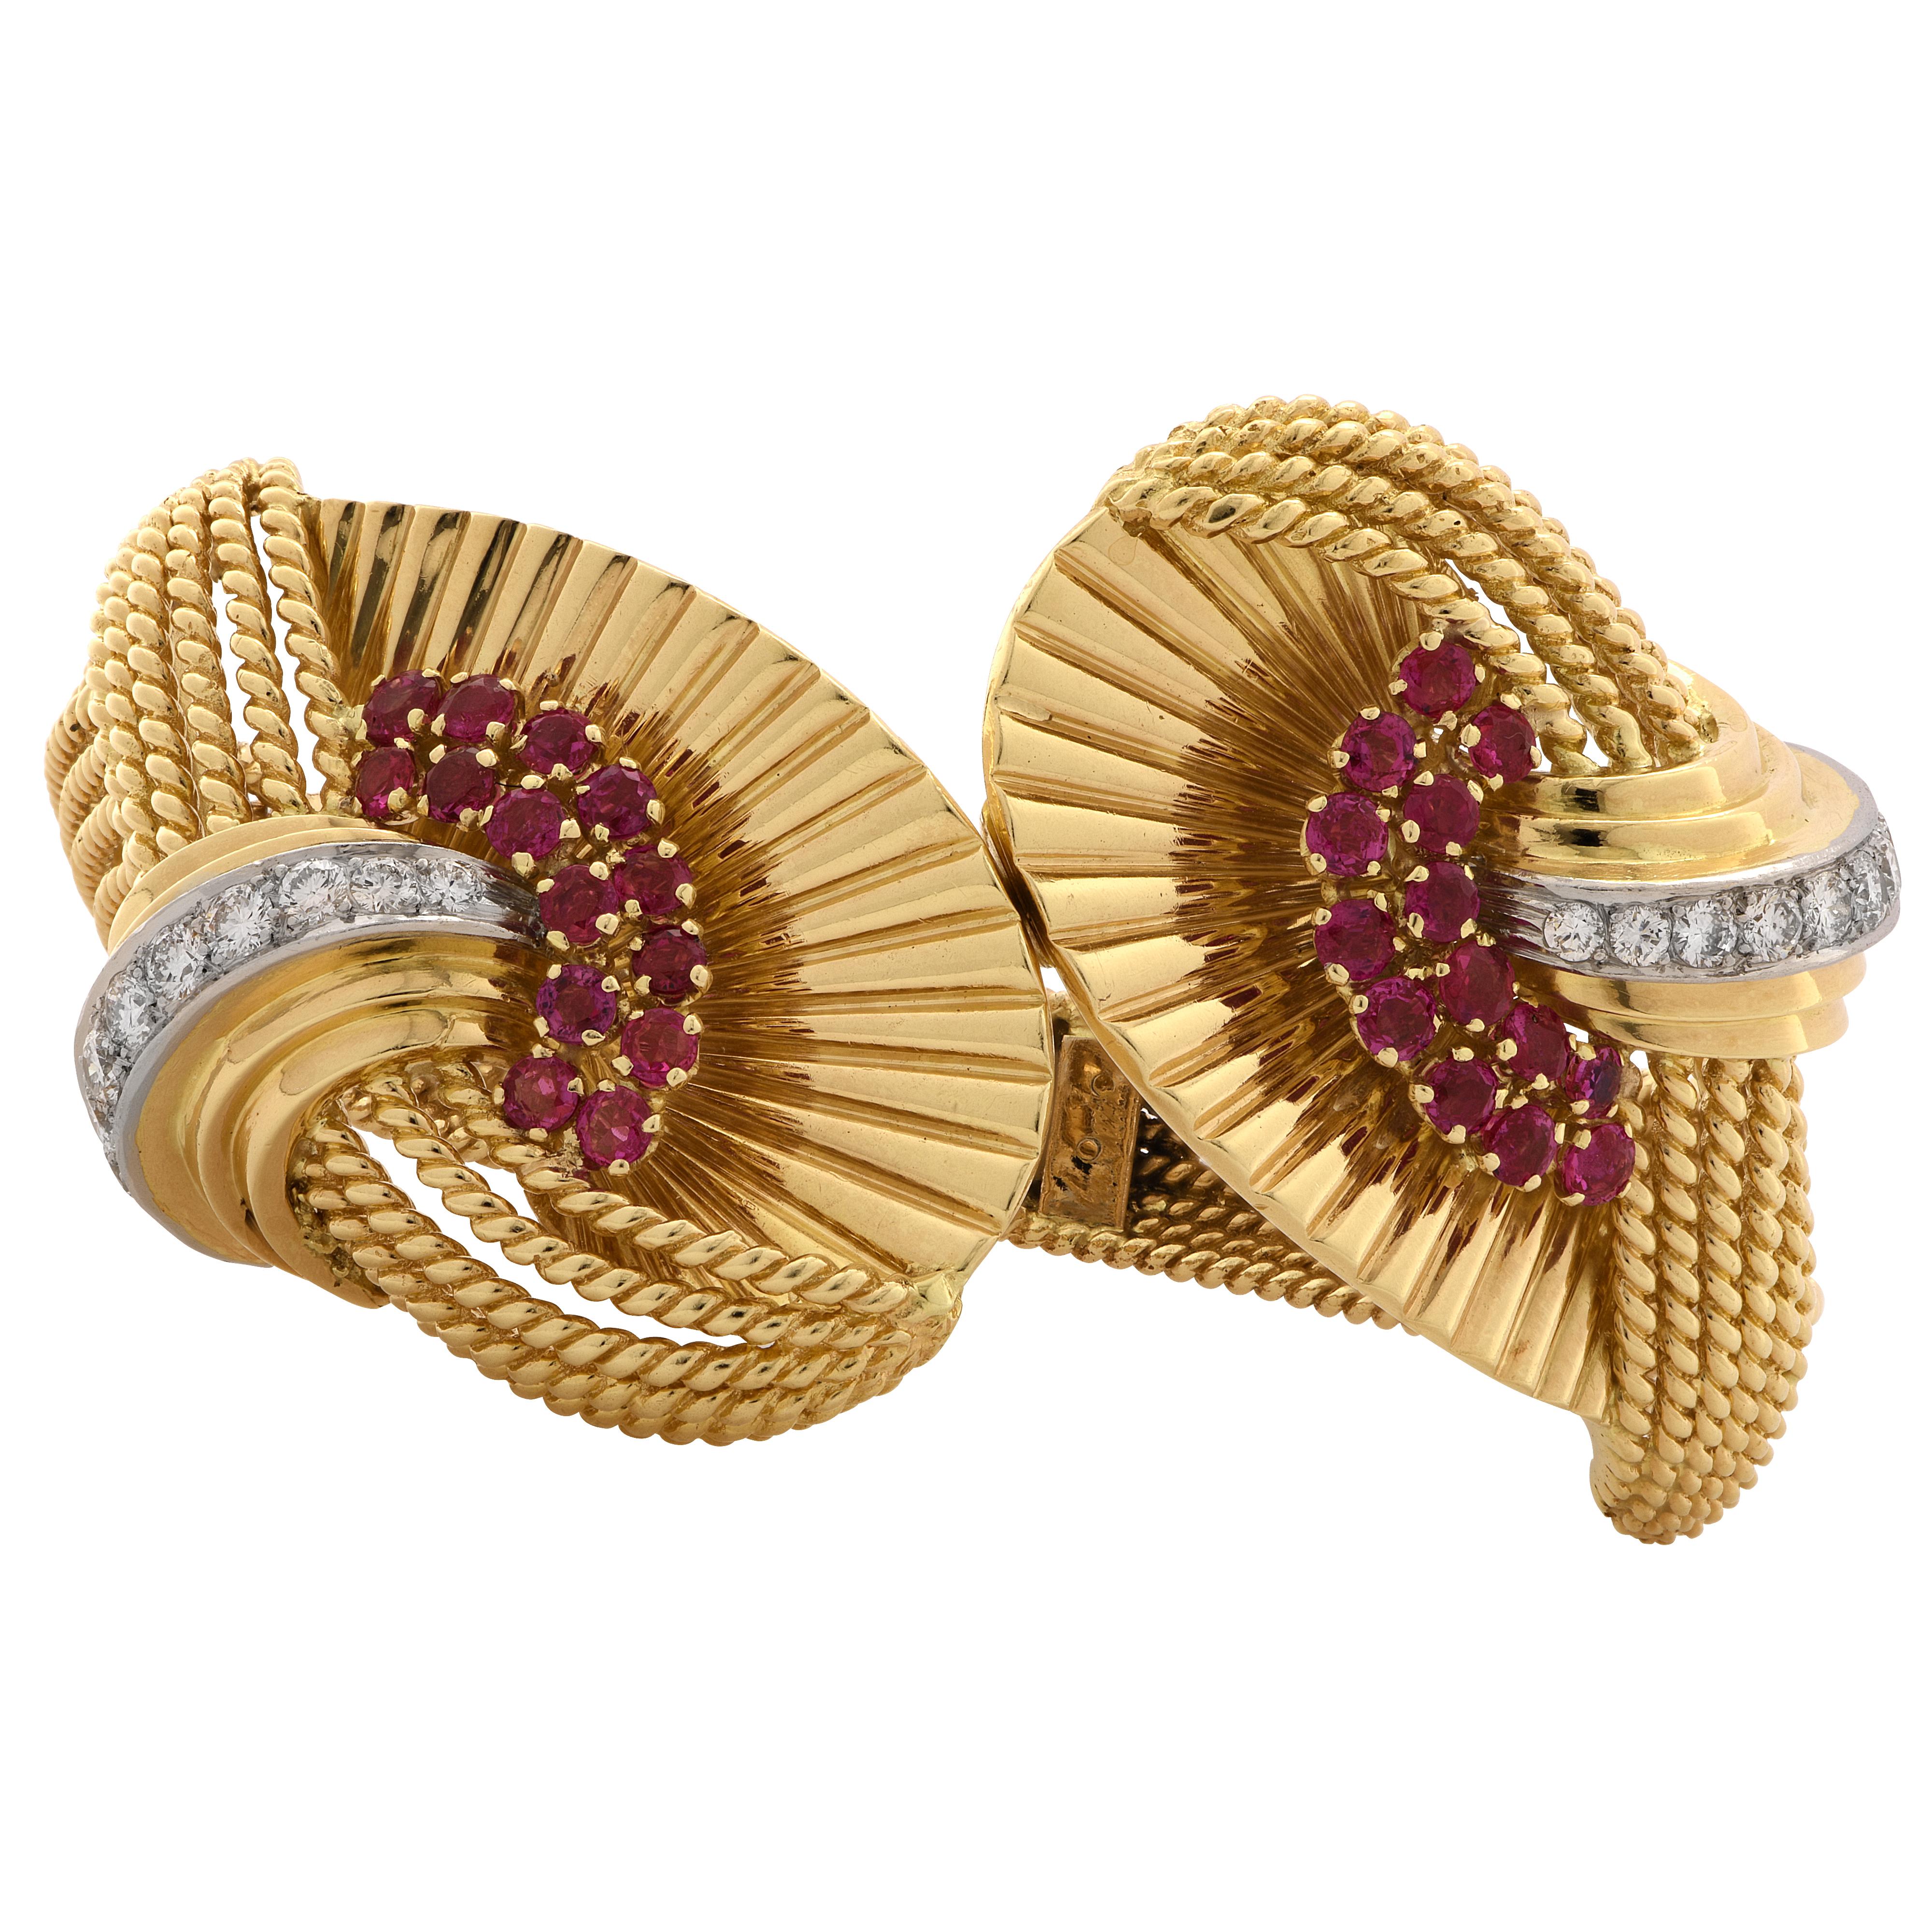 Spectacular Kutchinsky 18 Karat yellow gold retro bangle crafted in London, England in 1959, showcasing 20 round brilliant cut diamonds weighing approximately 2.50 carats, F color, VS clarity, further accented by 28 round cut Rubies weighing